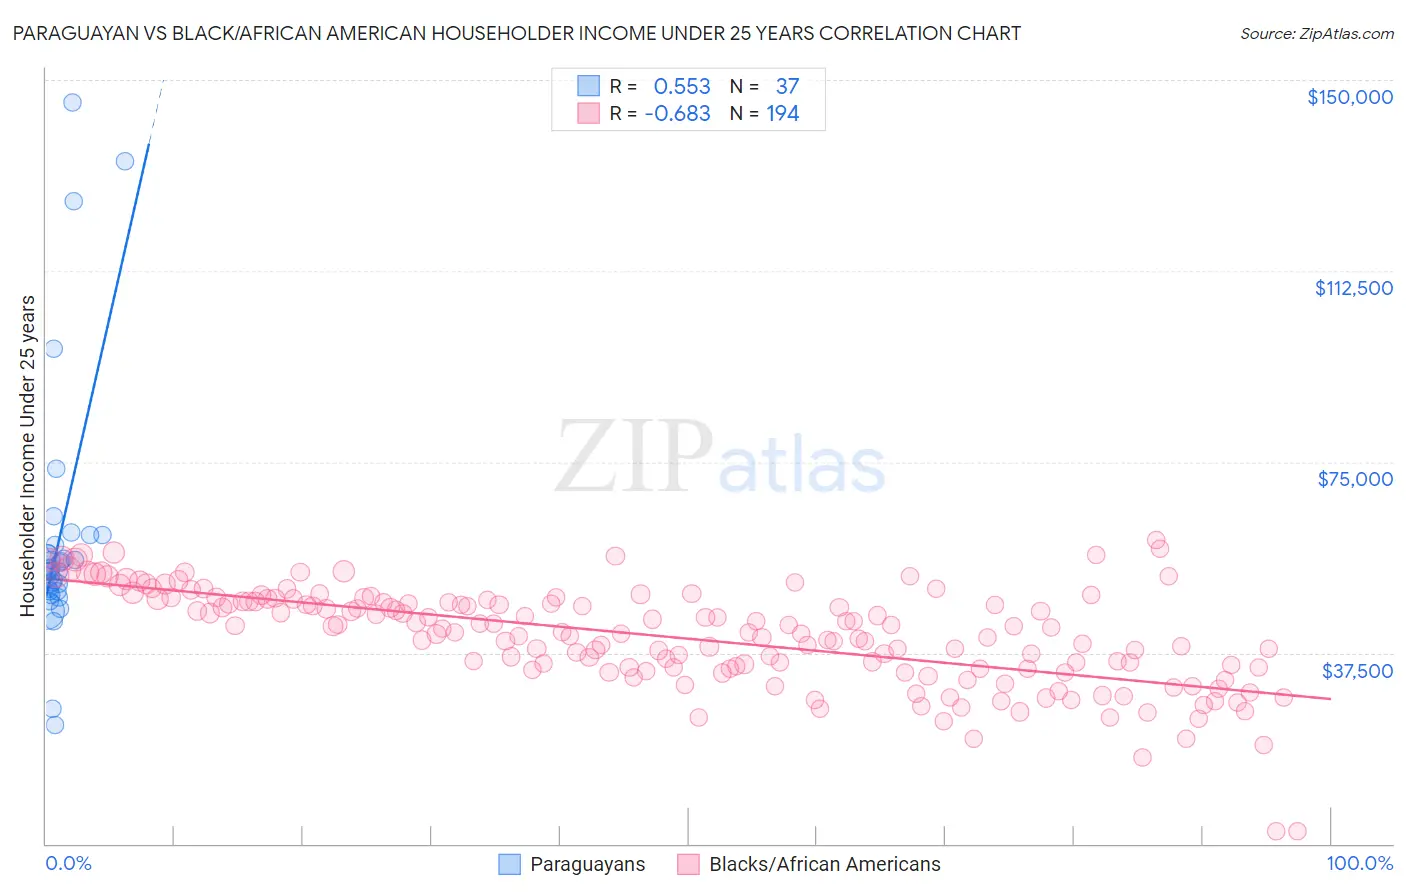 Paraguayan vs Black/African American Householder Income Under 25 years